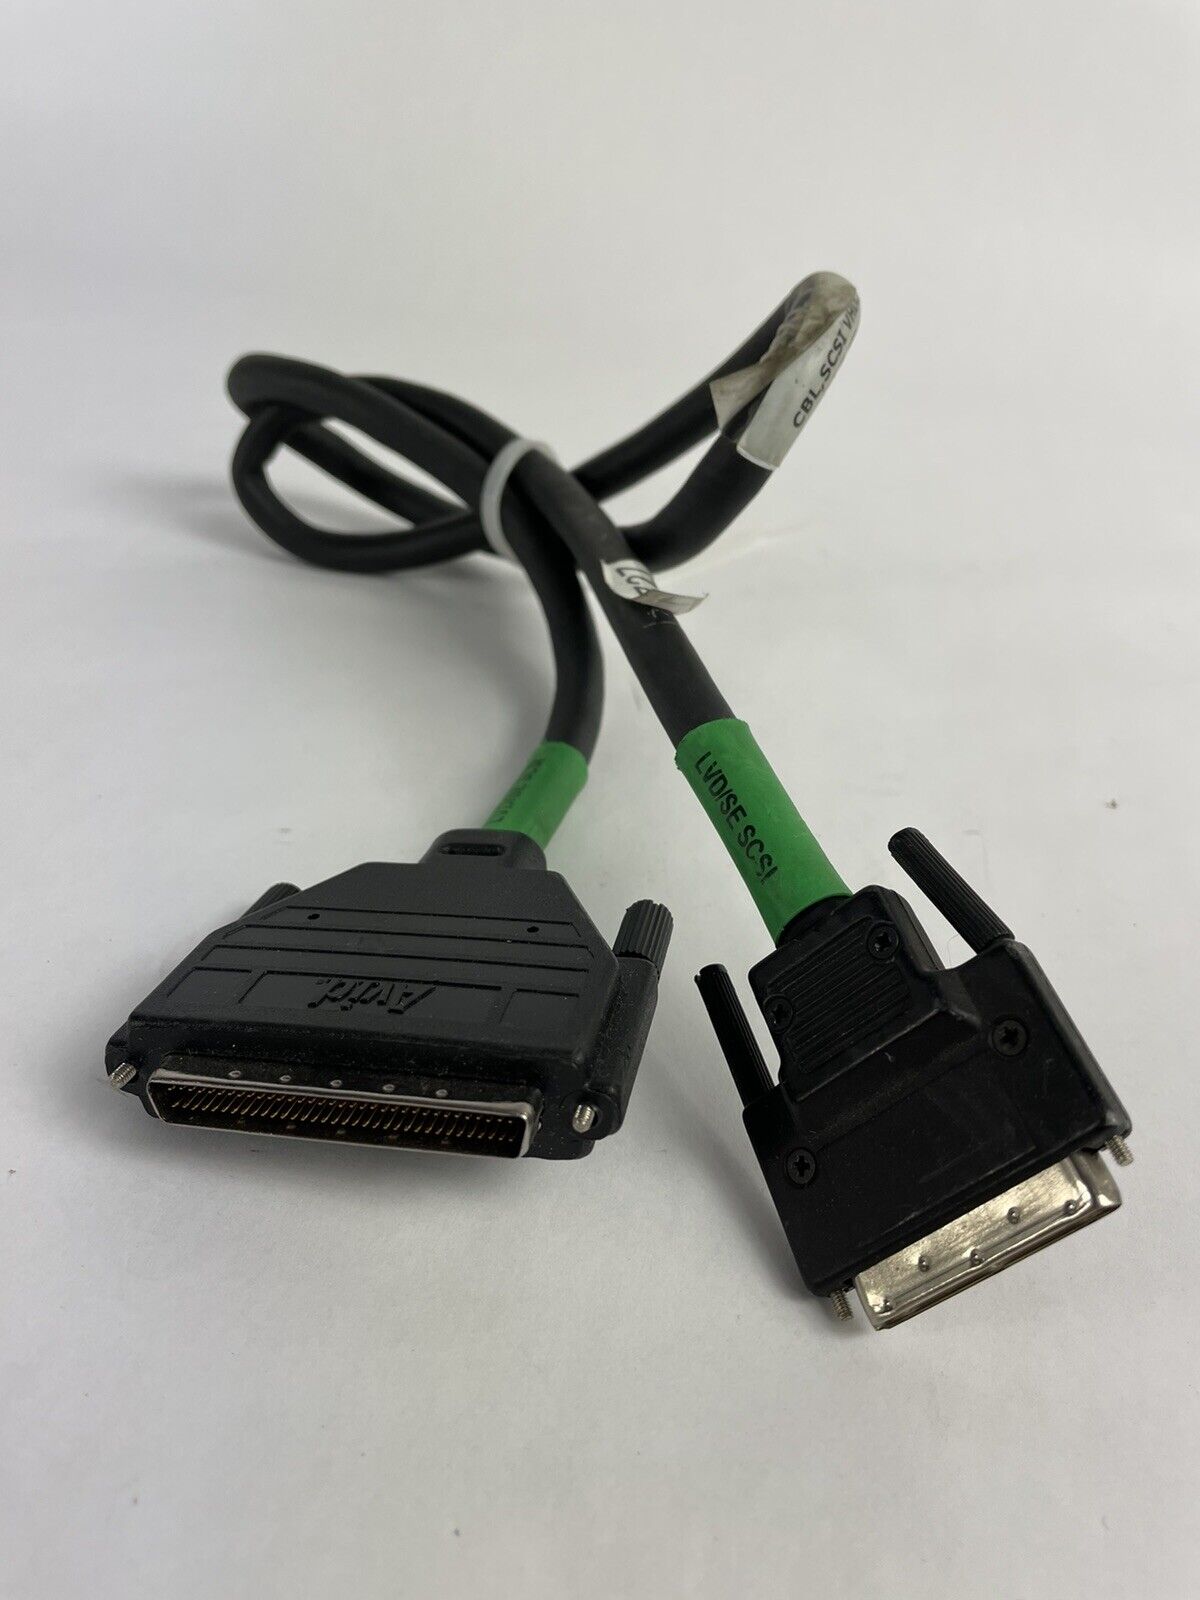 Avid 0070-00502-01 40in Cable with VHDCI-68HD SCSI Connectors for U160 SE Mode 